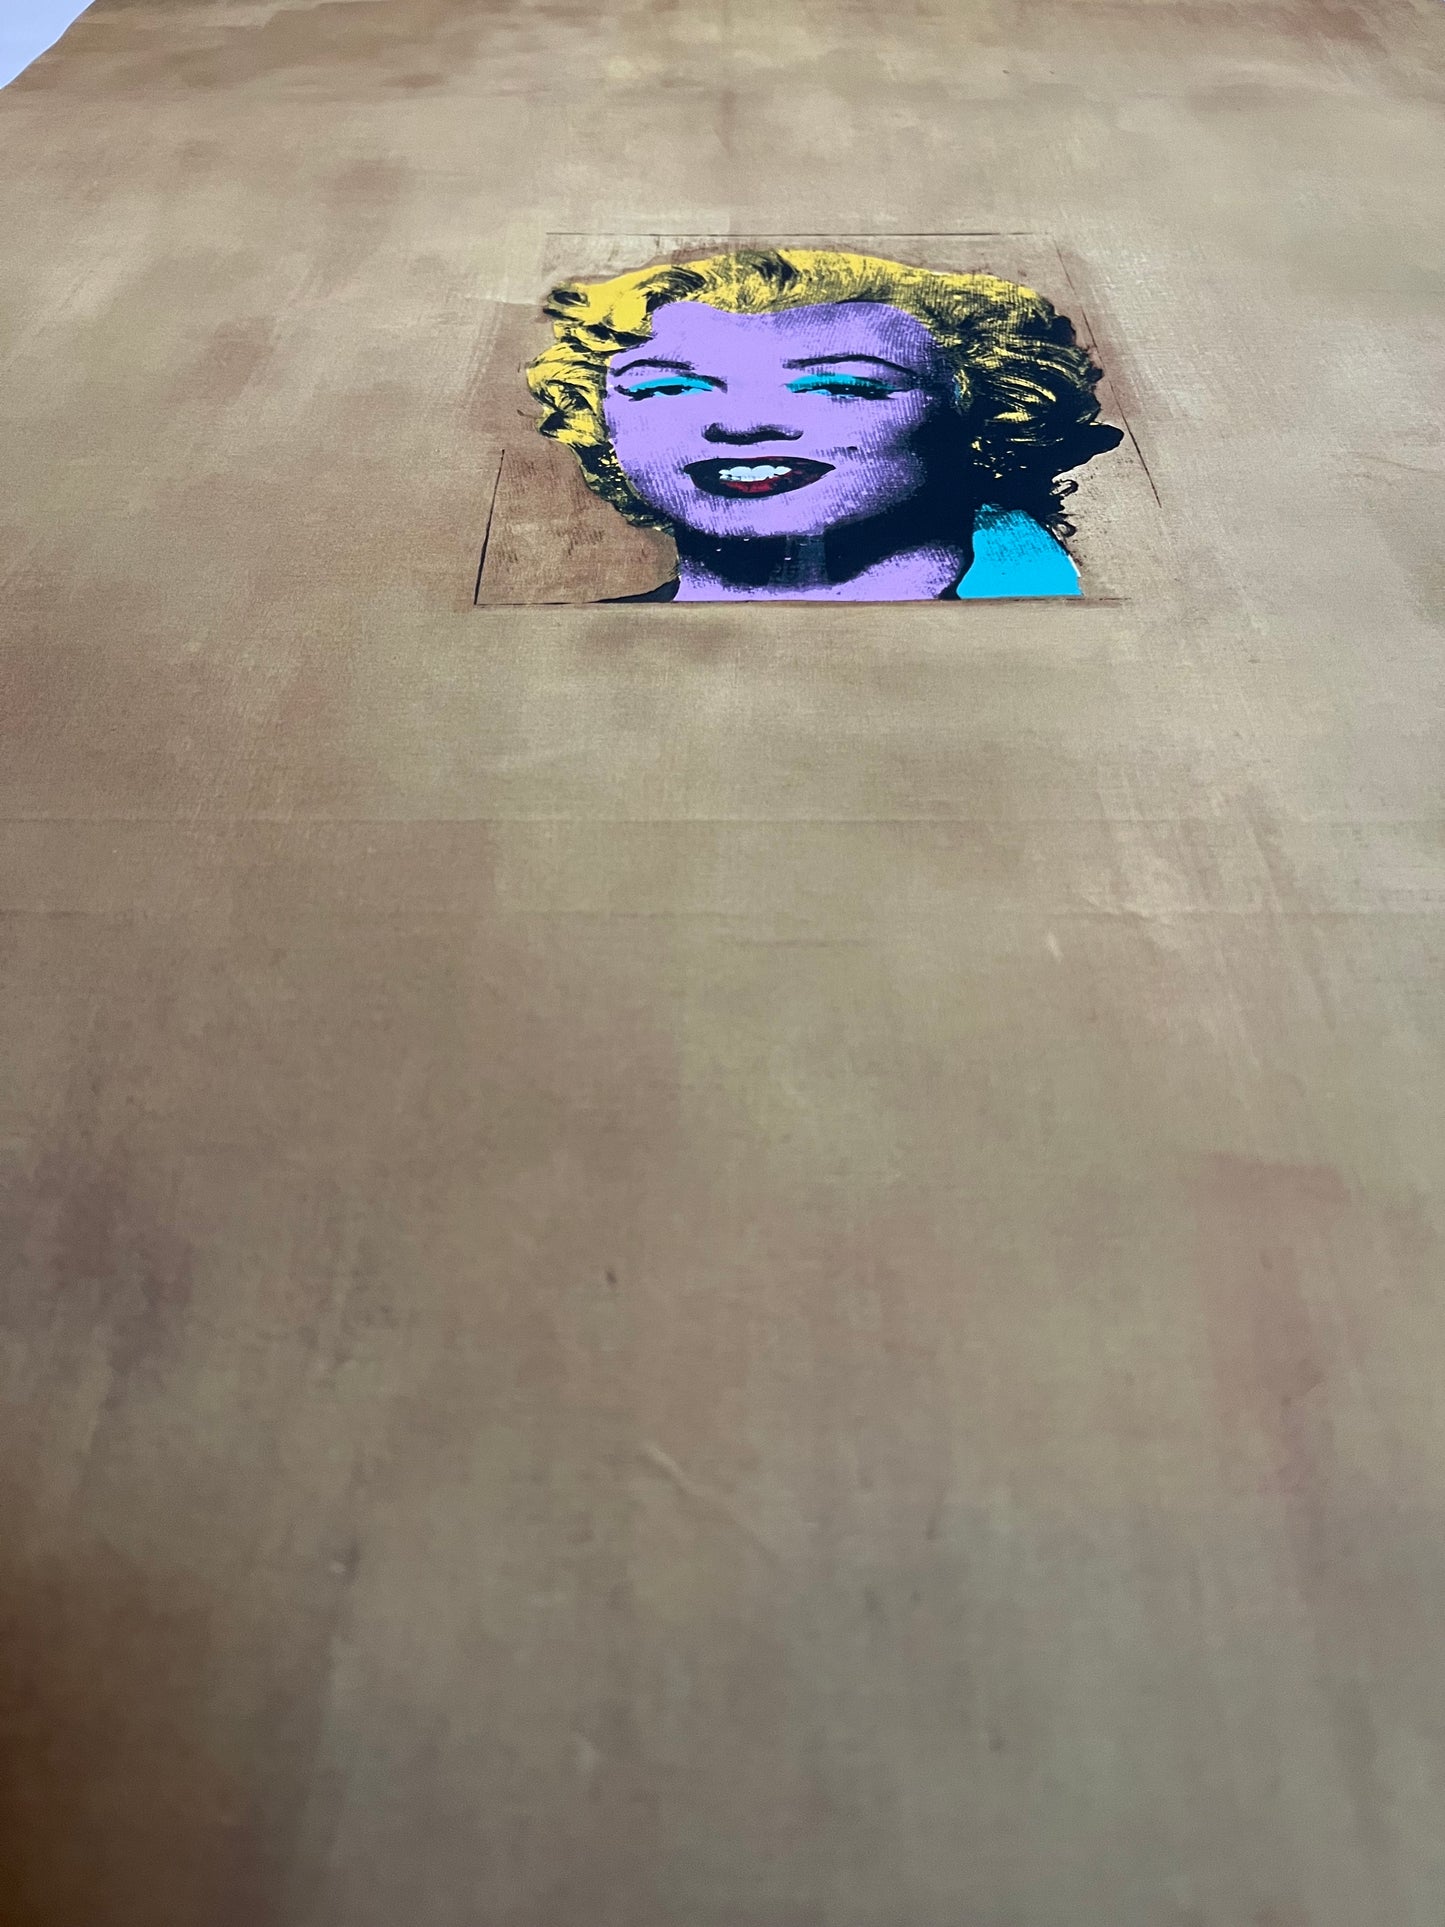 Andy Warhol, Gold Marilyn Monroe, 1962, Offsetlithographie